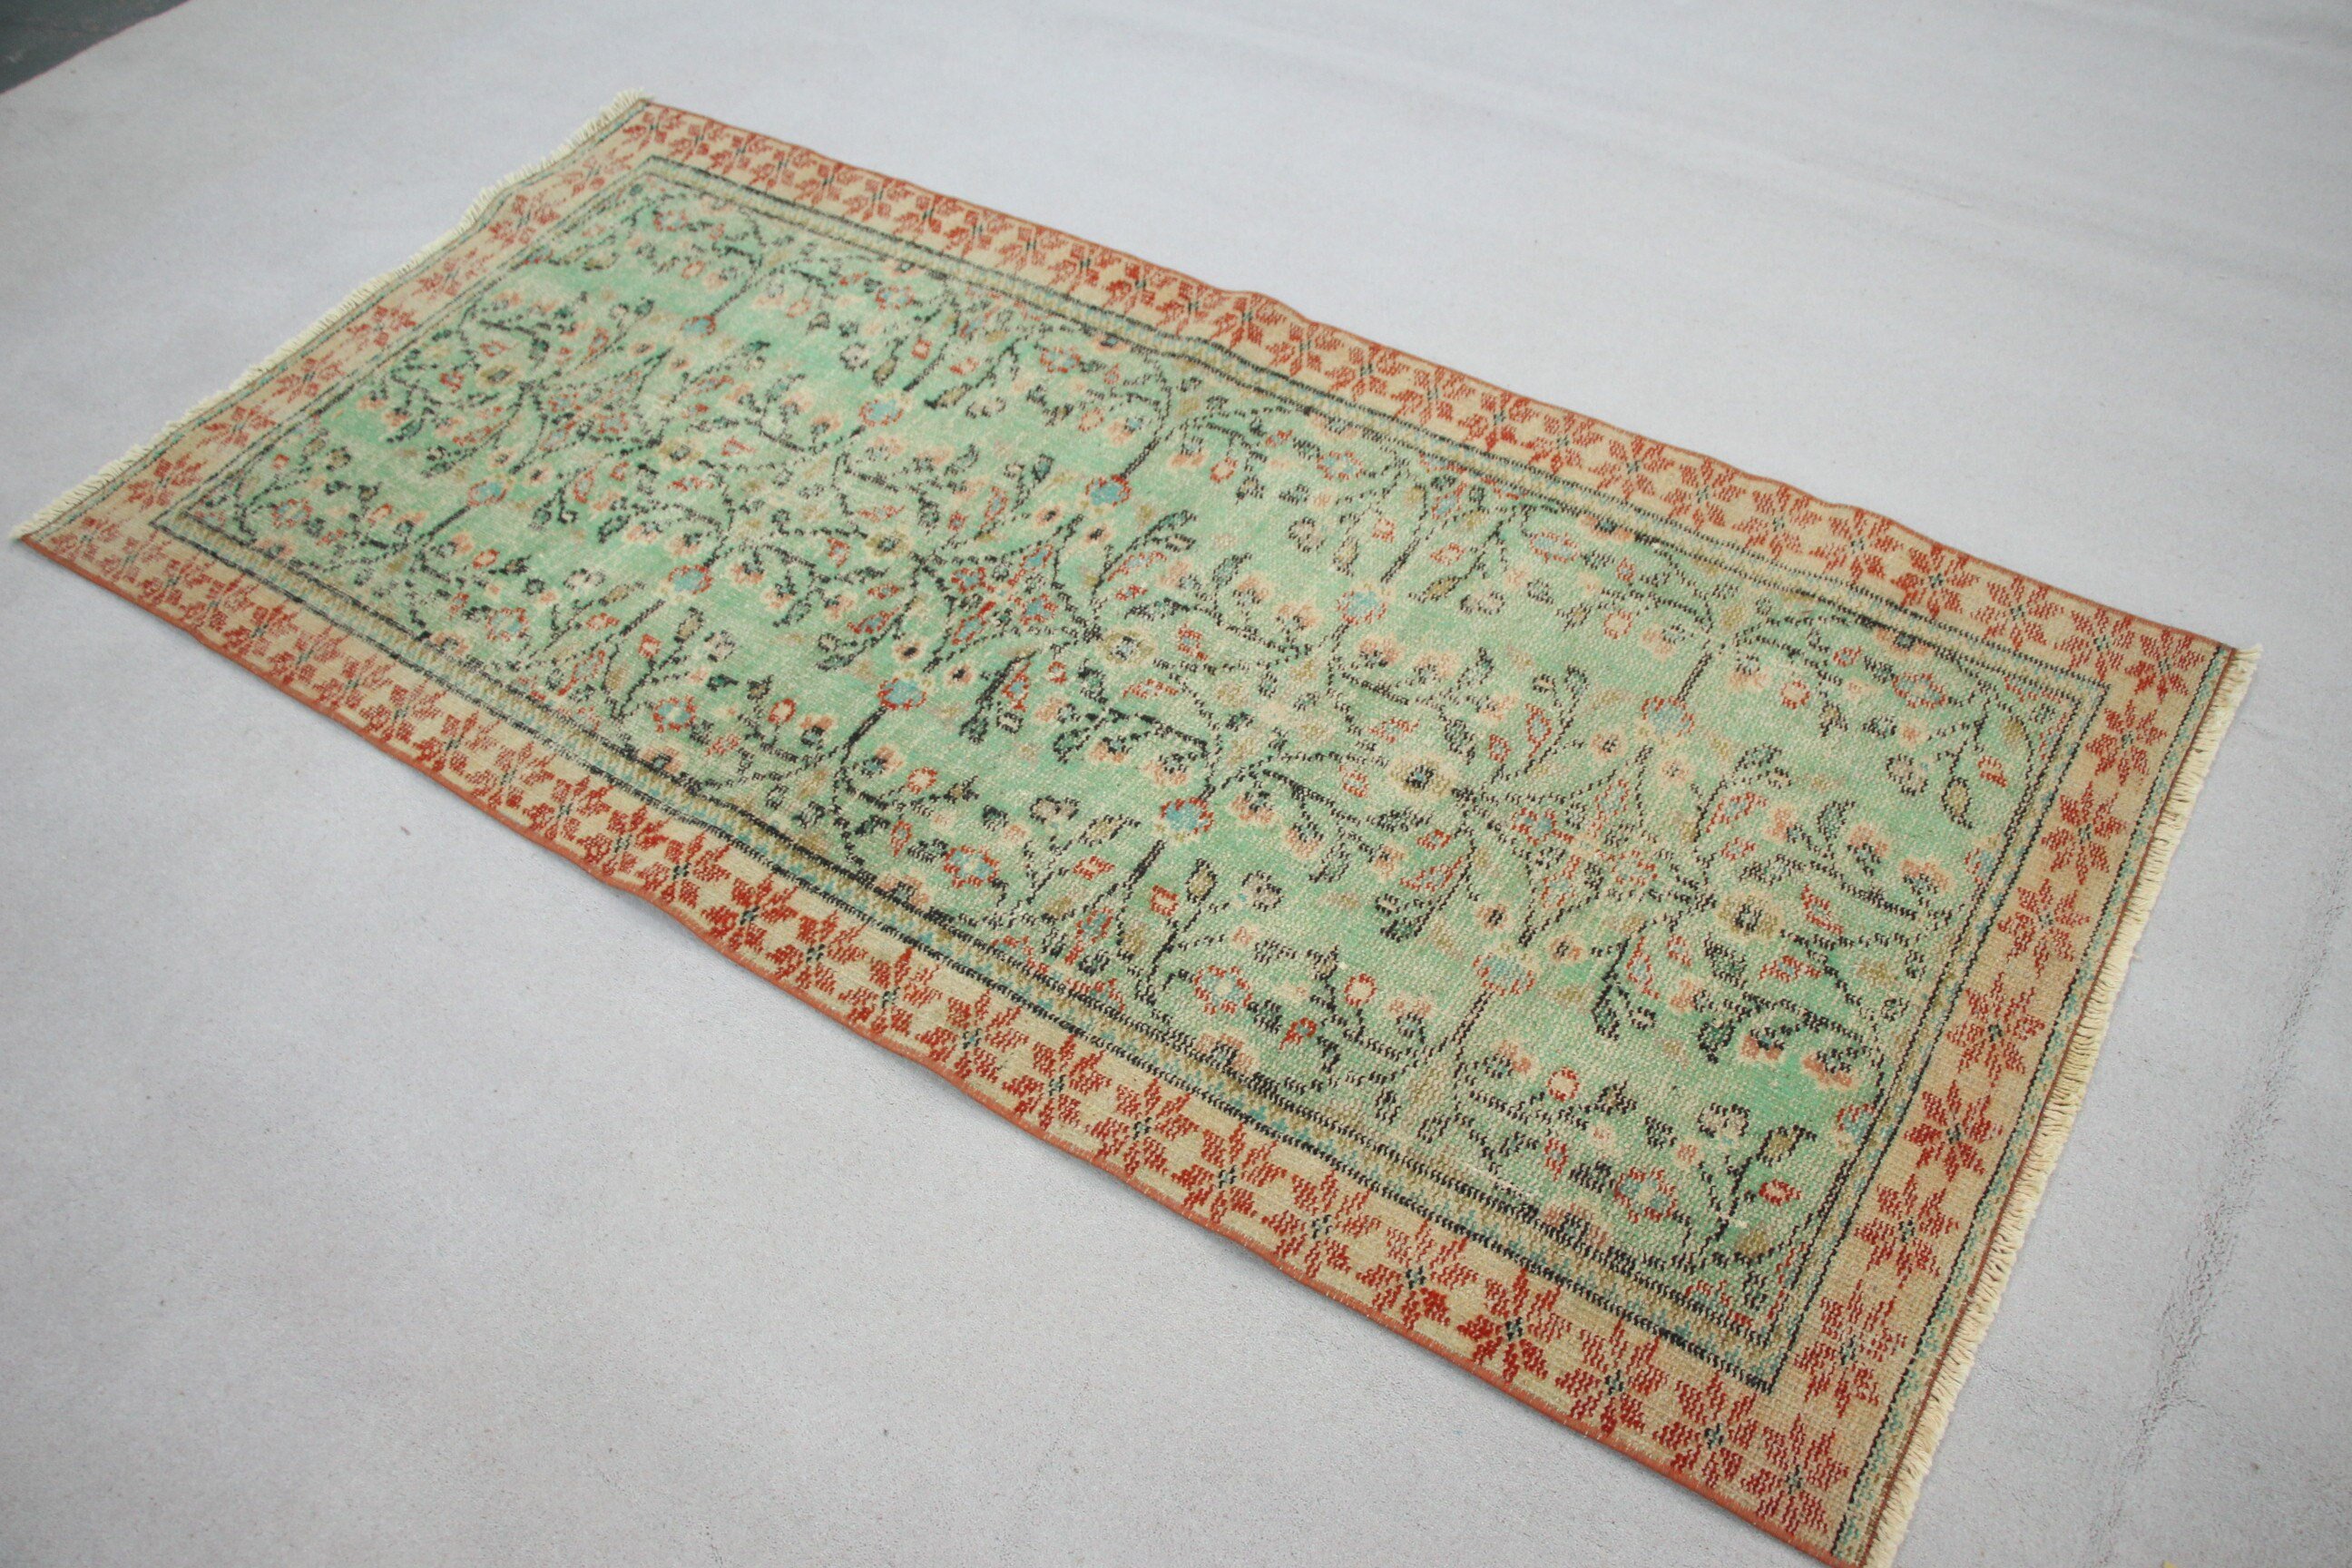 Entry Rug, Anatolian Rug, 3.1x6.4 ft Accent Rugs, Distressed Rug, Turkish Rug, Kitchen Rug, Vintage Rugs, Home Decor Rugs, Green Floor Rug